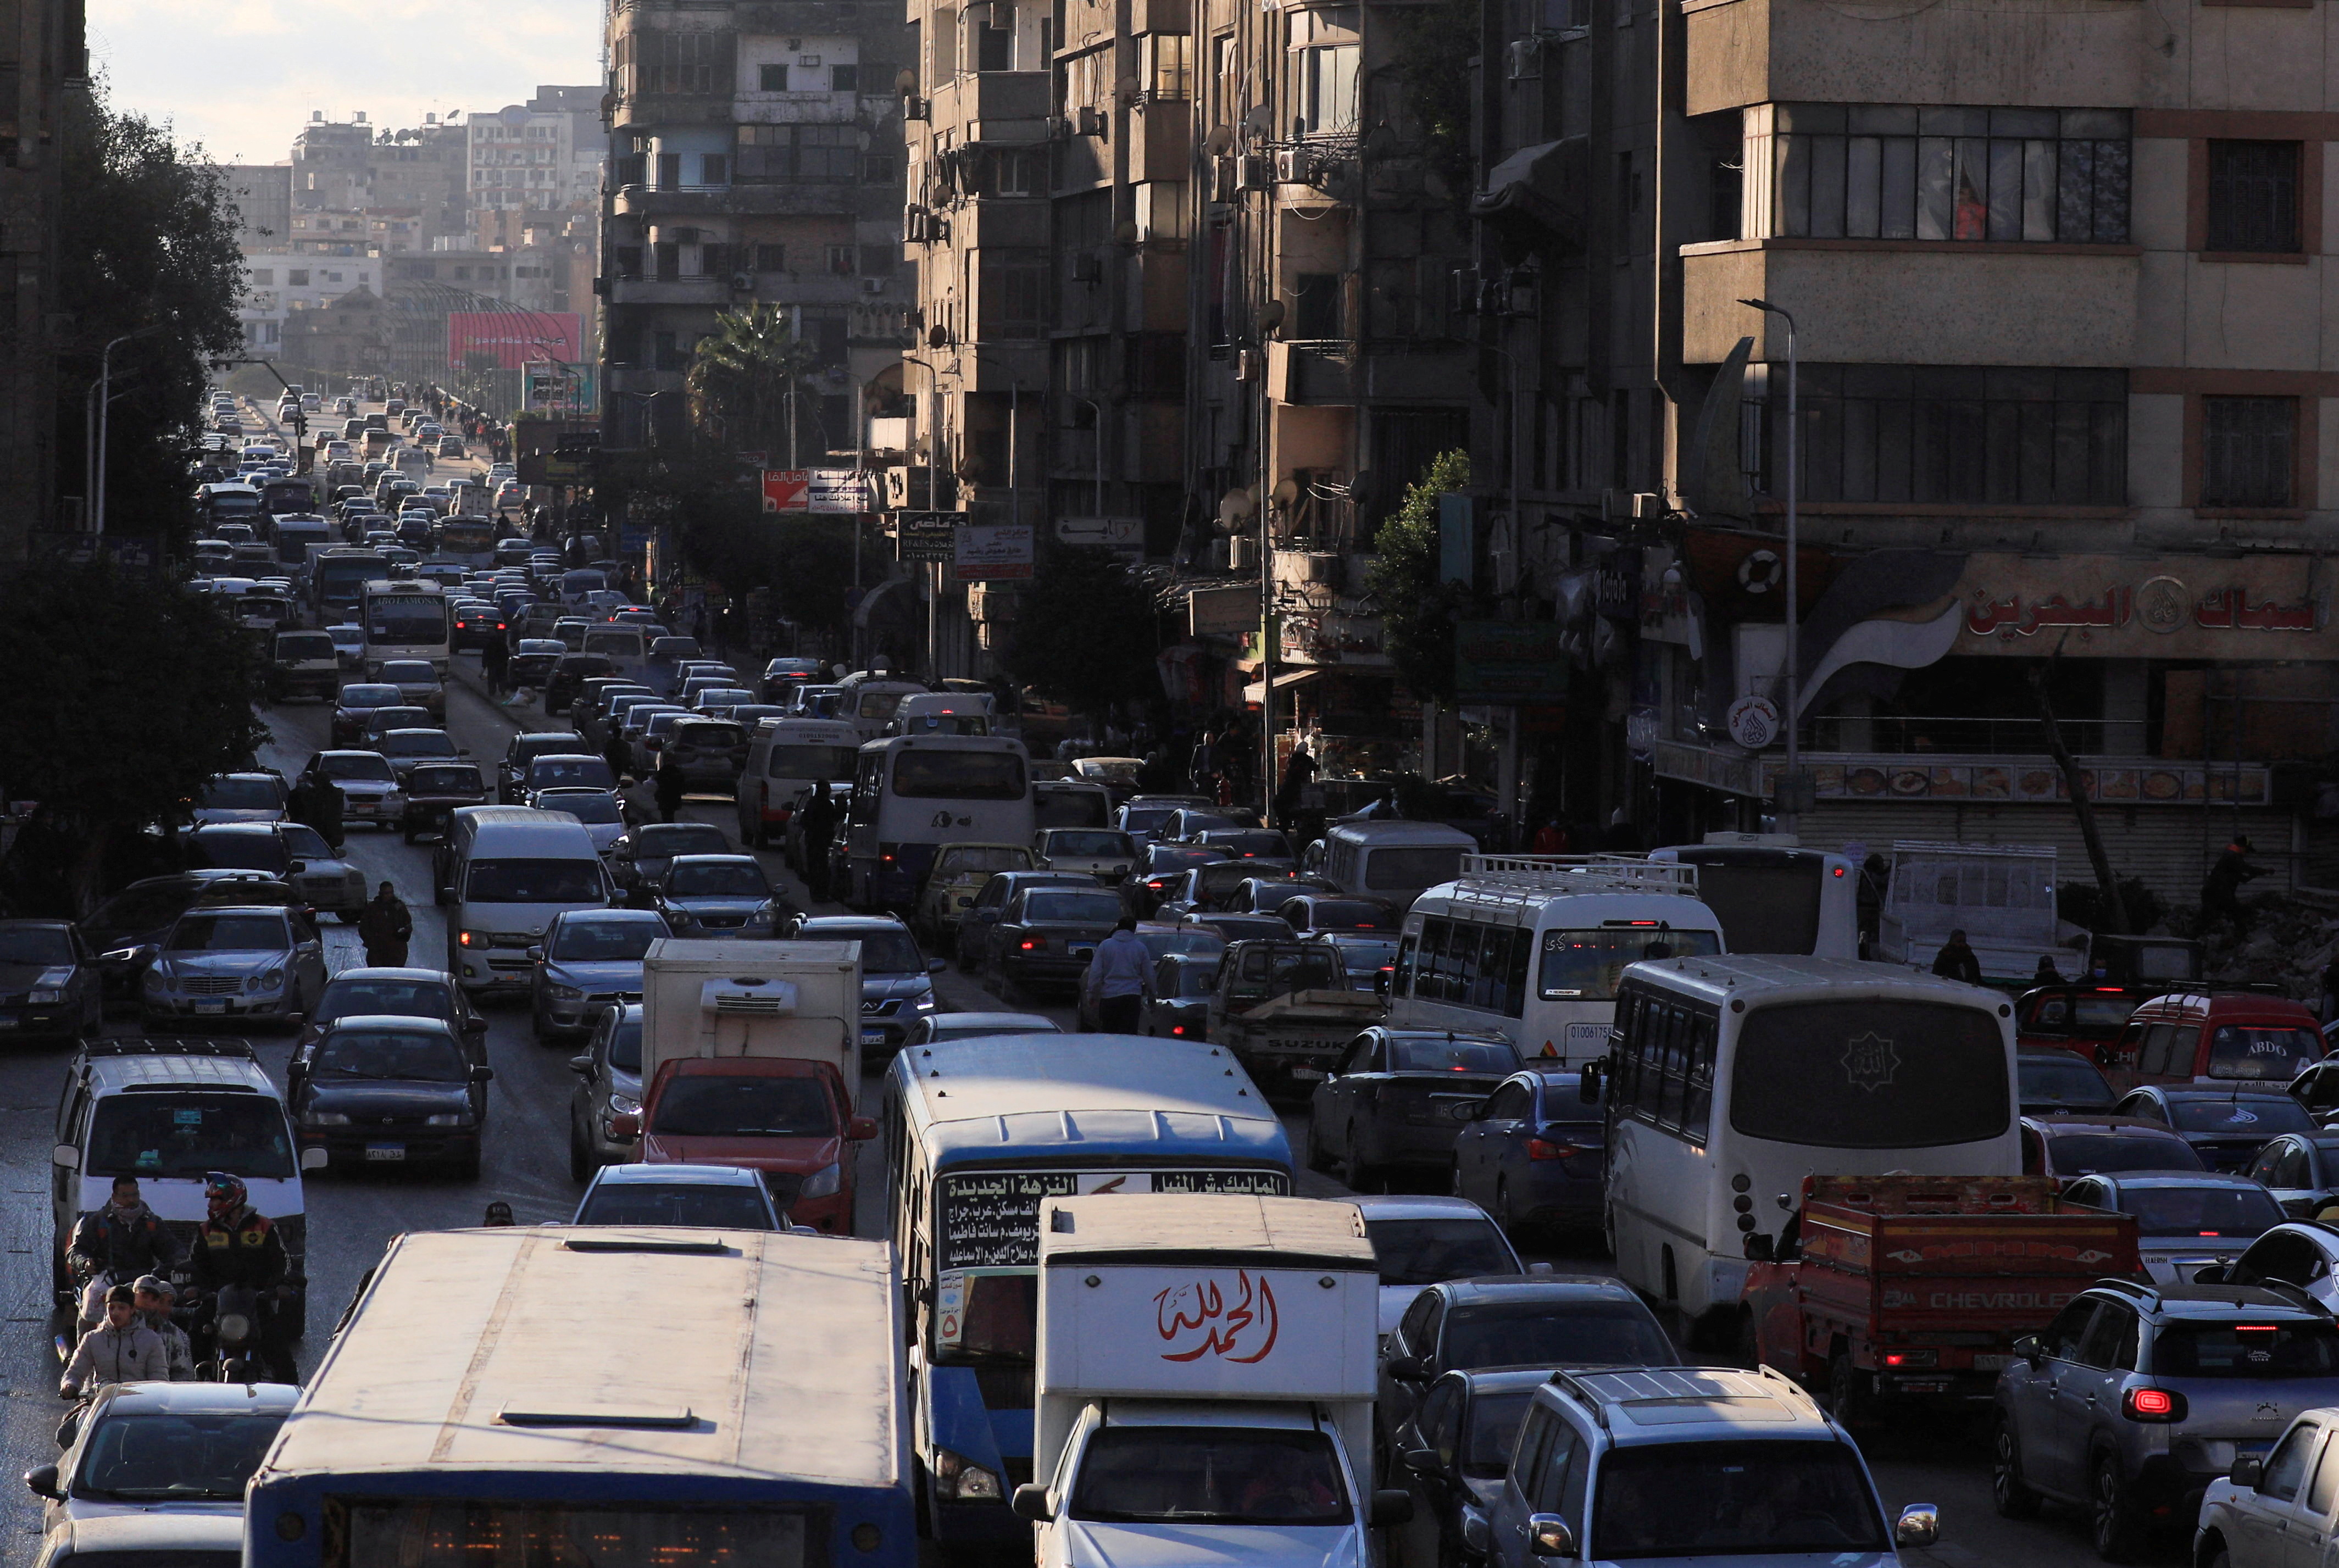 A general view of traffic jam after heavy rains, in Cairo